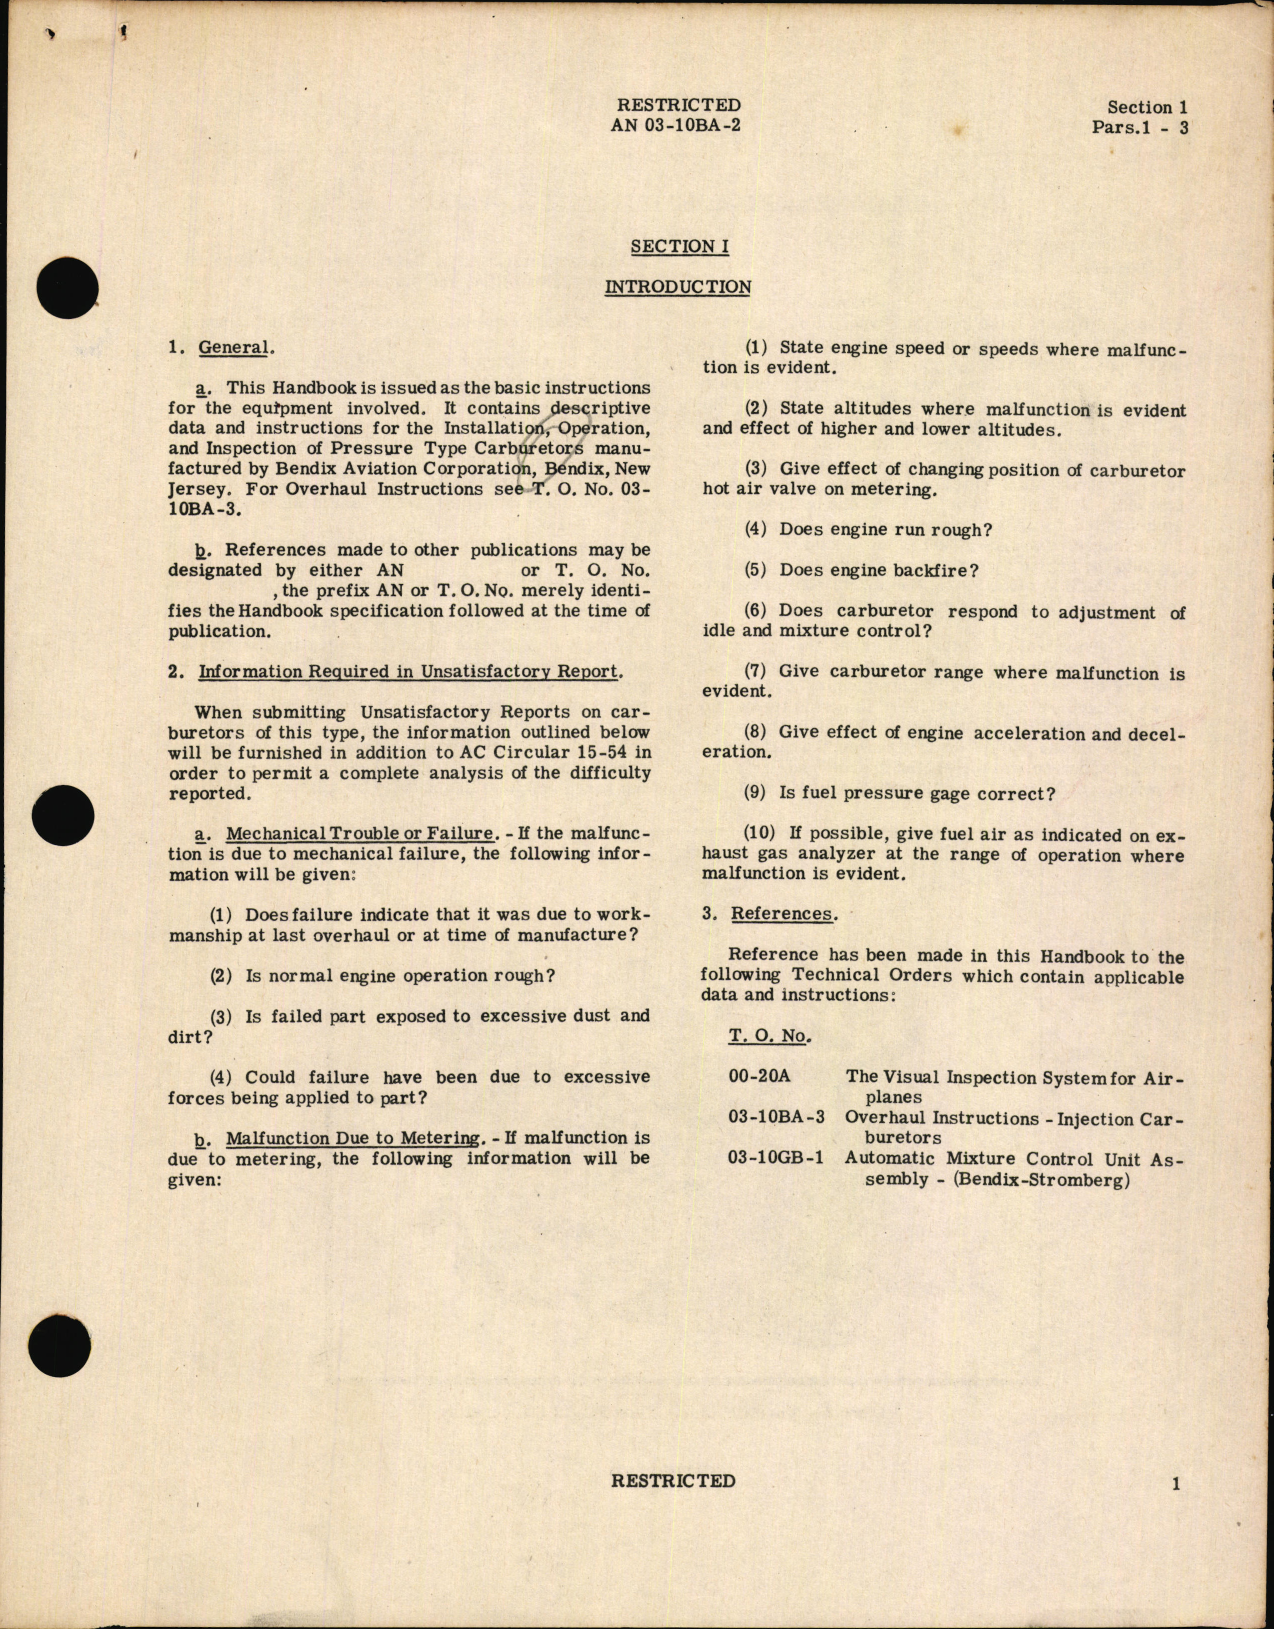 Sample page 7 from AirCorps Library document: Handbook of Service Instructions for Injection Carburetors